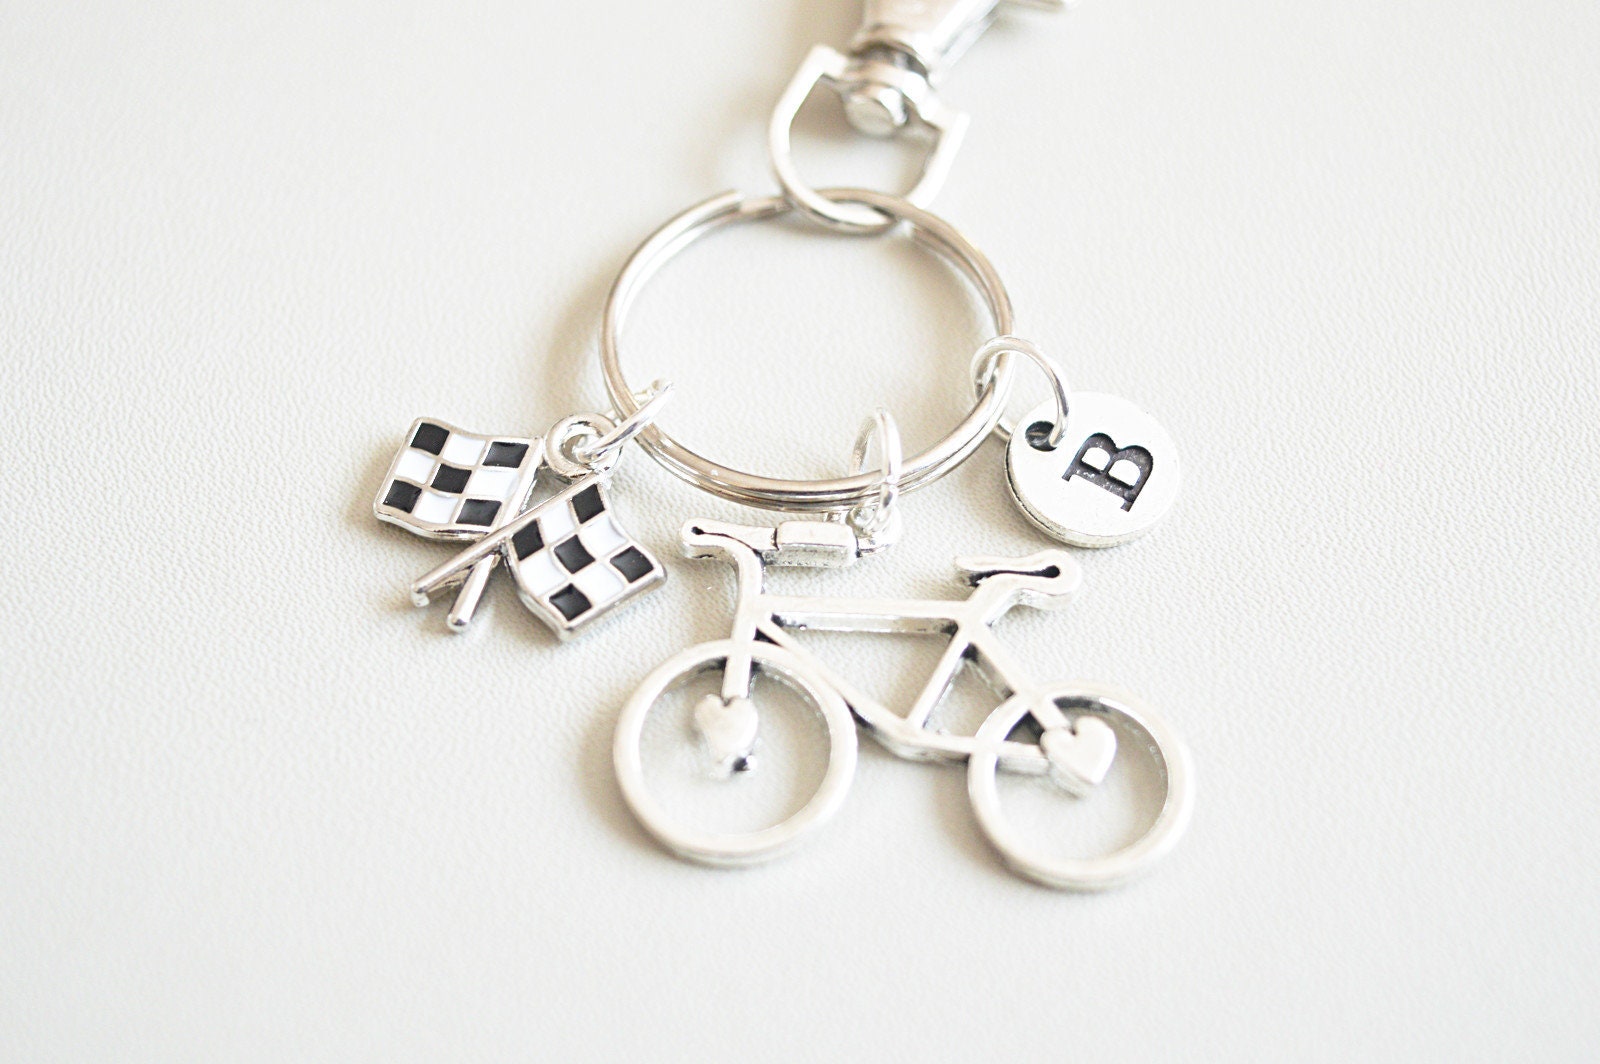 Cyclist Gift, Cyclist Keyring, Cyclist Keychain, Bicycle Gift, Bicycle KEychain, Bicycle Keyring, Cycalist Gifts for her, cycling, Biker,